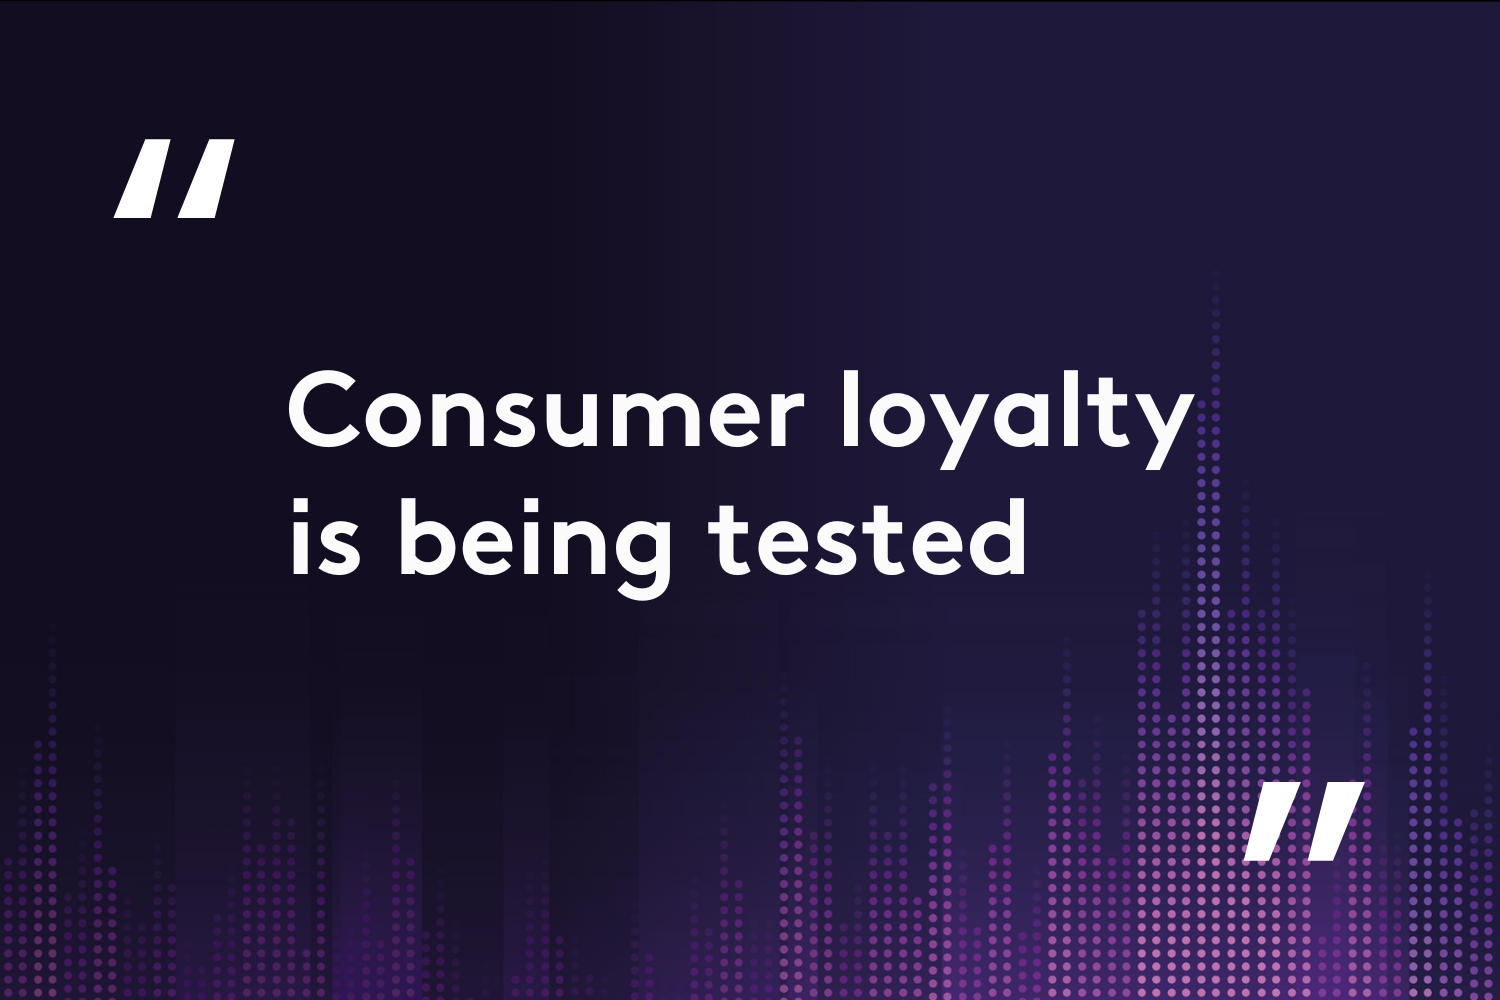 Consumer loyalty is being tested